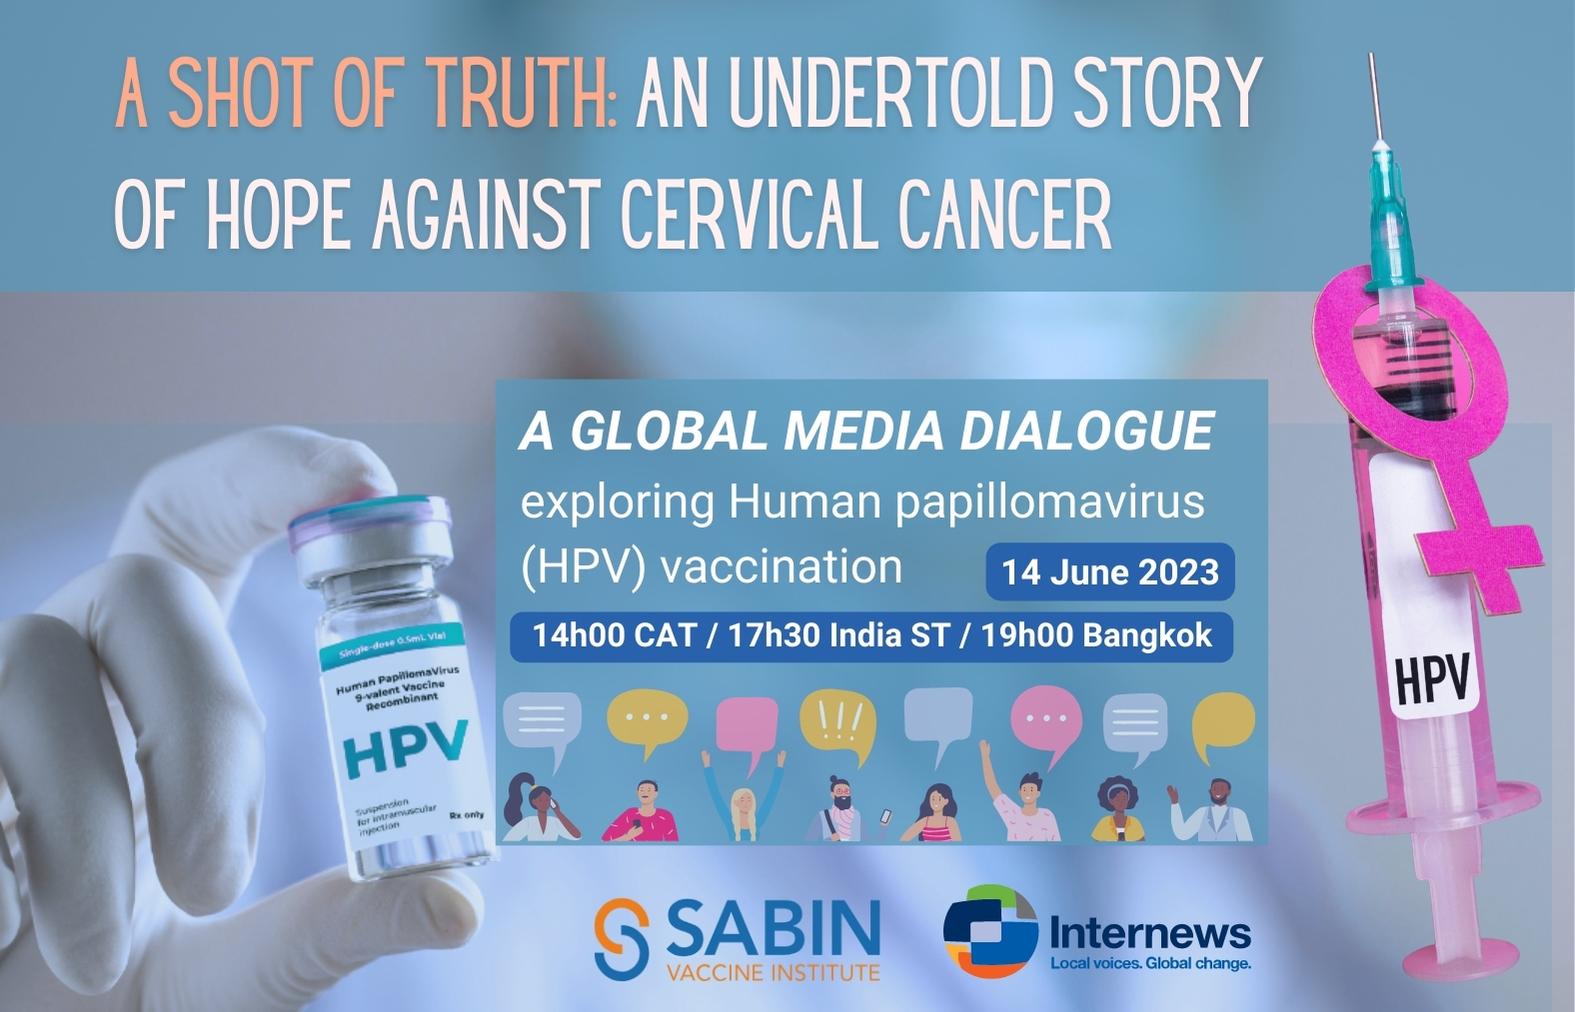 A shot of truth: An undertold story of hope against cervical cancer - Join us for a global media dialogue exploring HPV vaccination